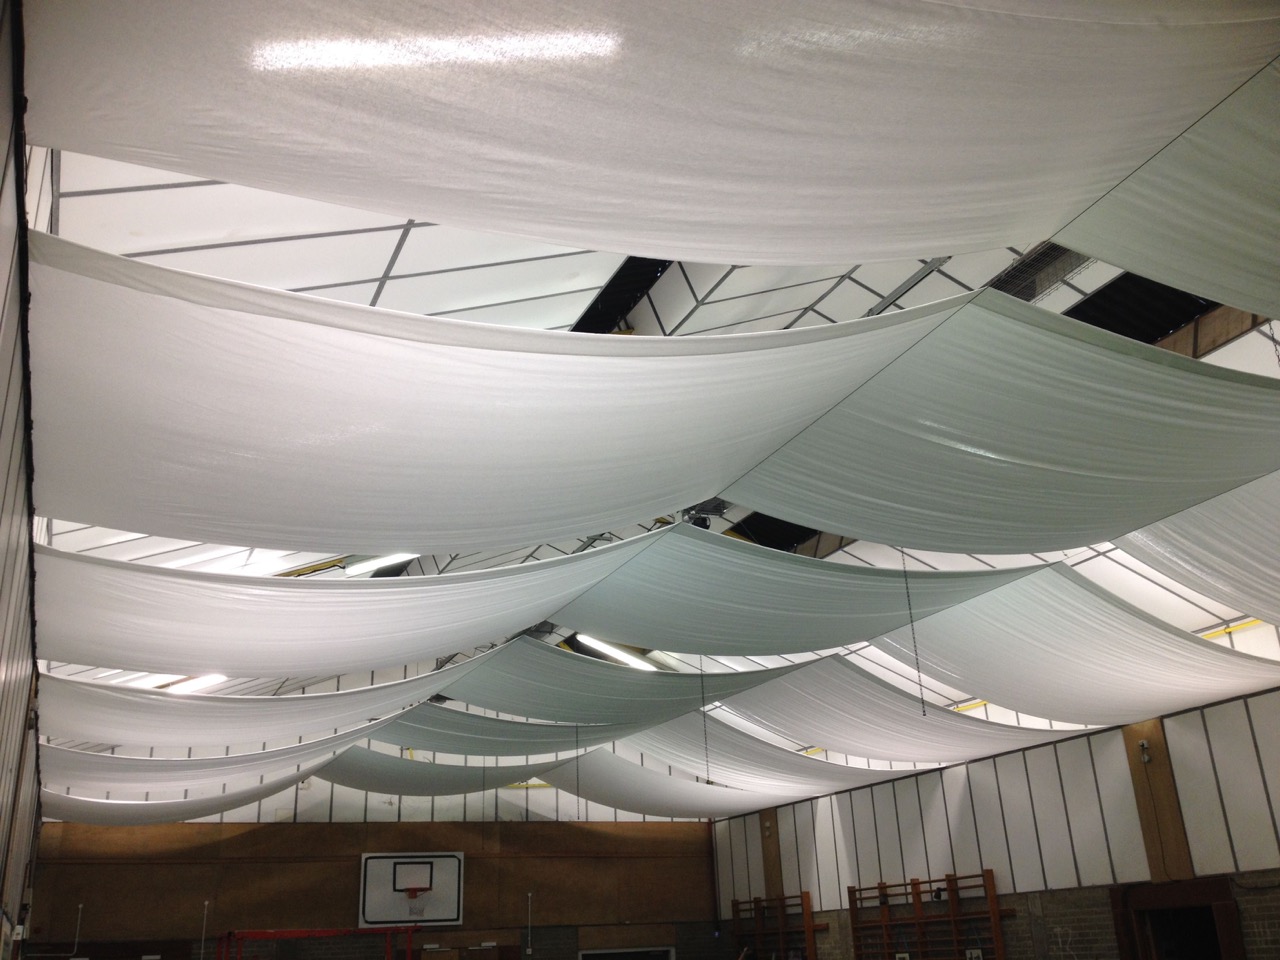 How To Drape A Ceiling With Fabric